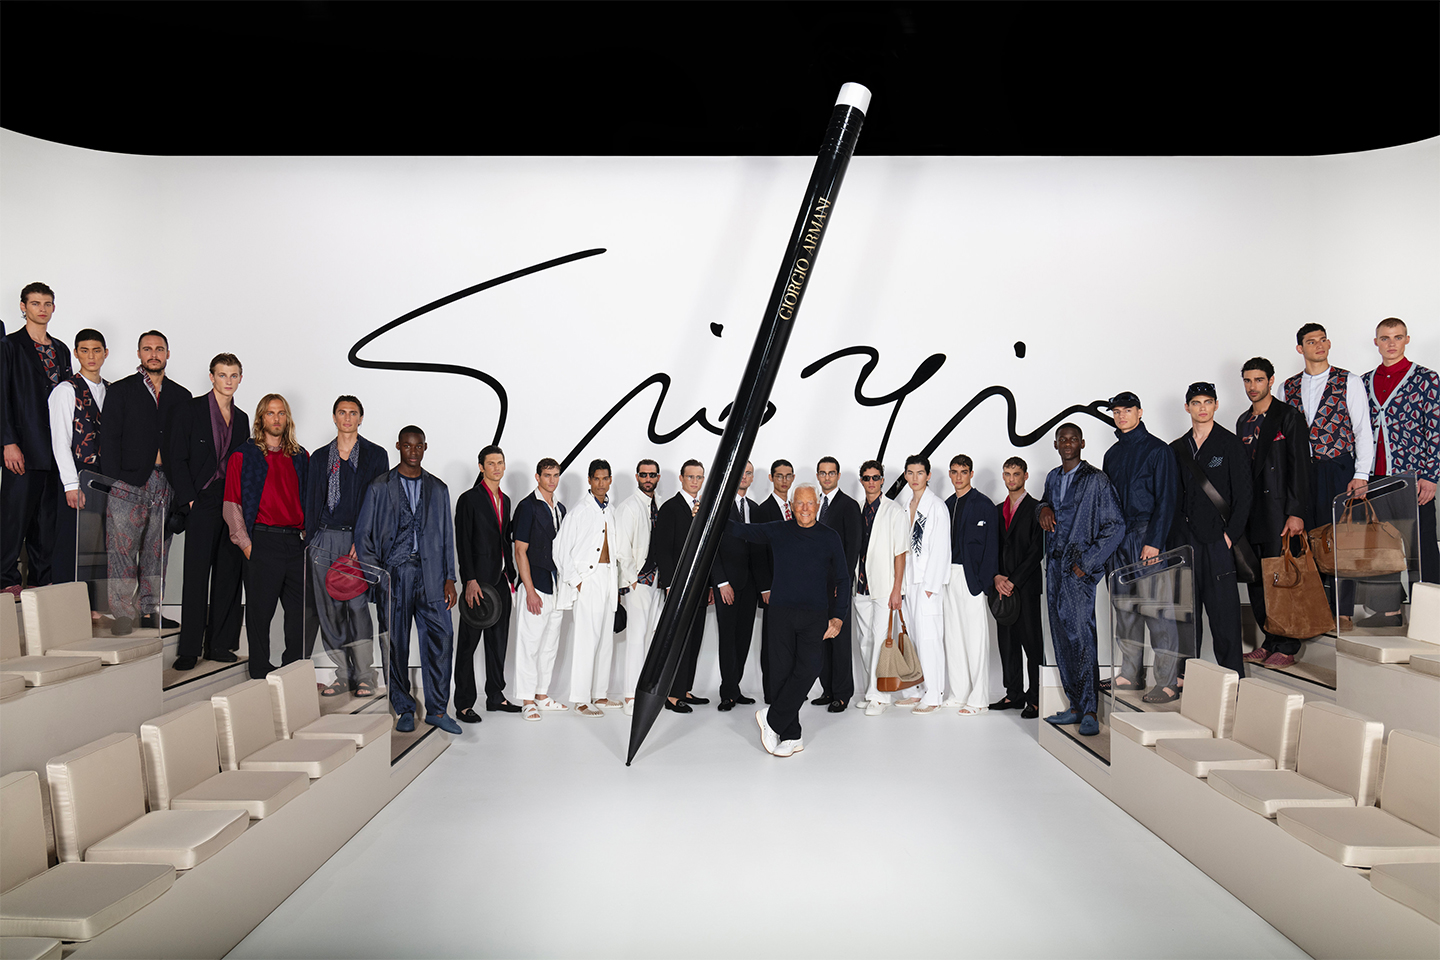 Giorgio Armani paid tribute to his creative process in his latest collection, with an oversized pencil symbolising the beginning of every collection. © Photo: SGP Courtesy Giorgio Armani